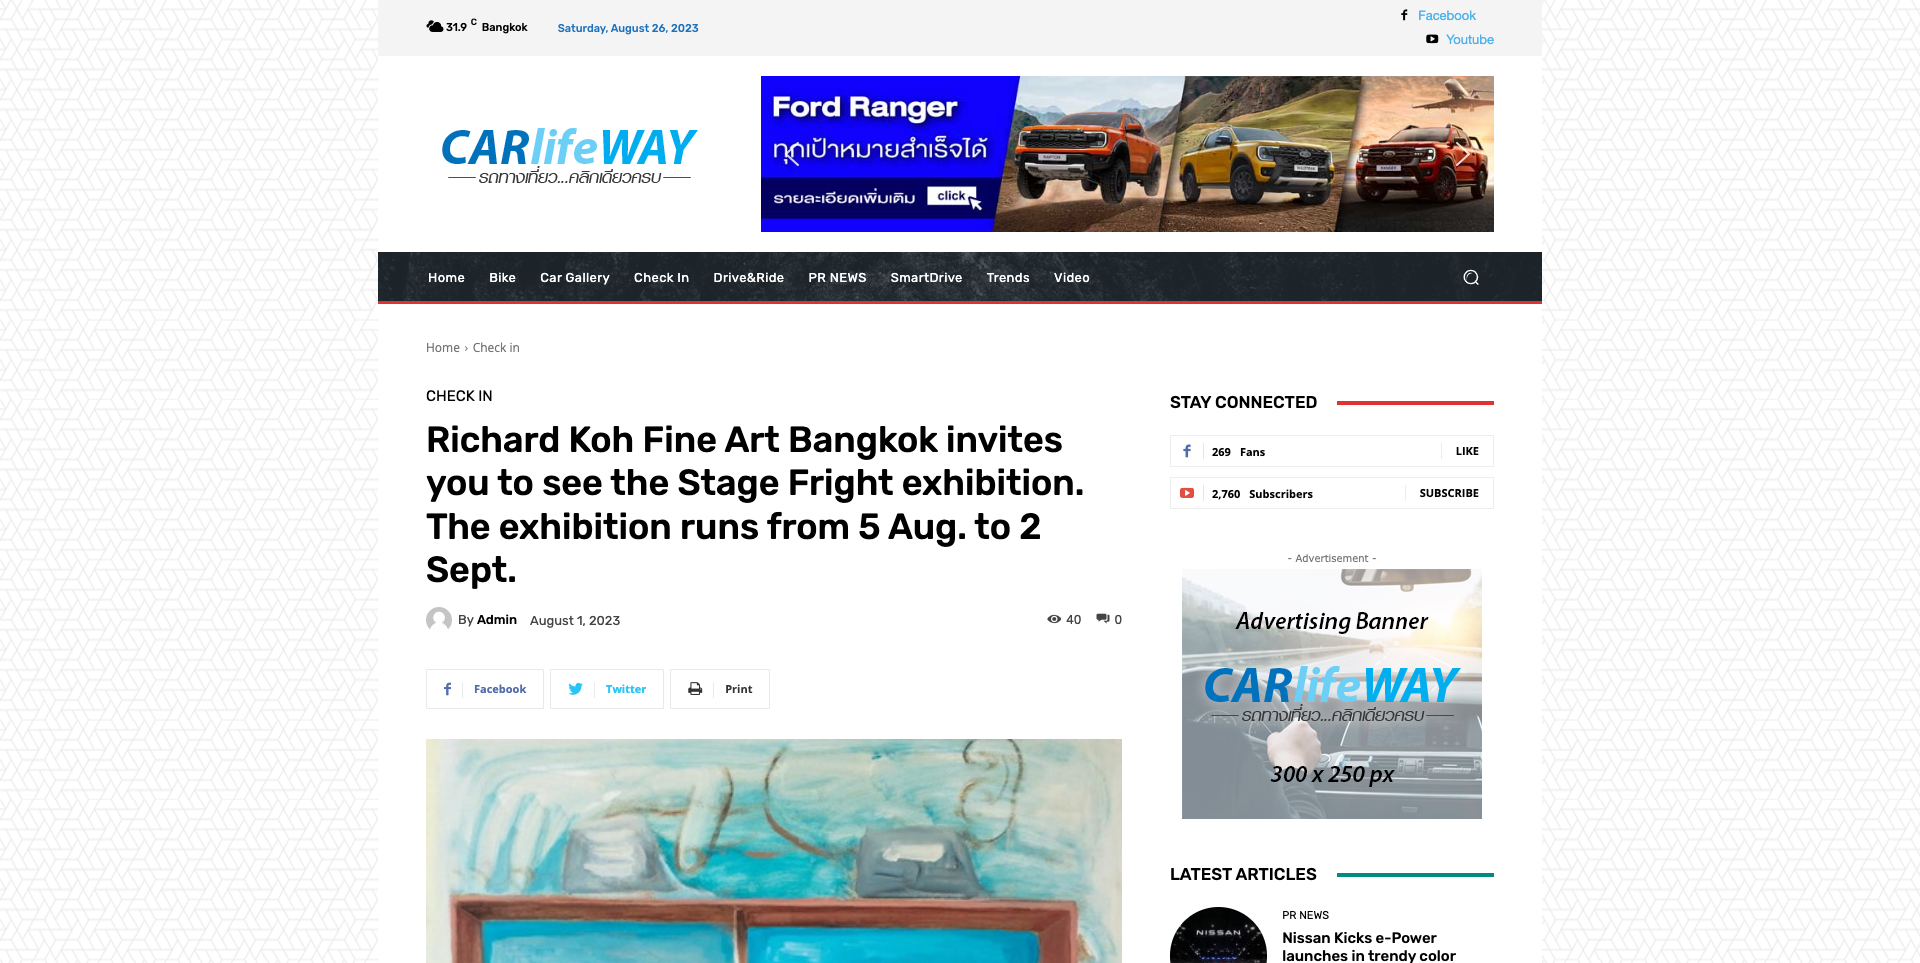 Carlife Way – Richard Koh Fine Art Bangkok invites you to view the Stage Fright exhibition, 5 Aug.–2 Sep.